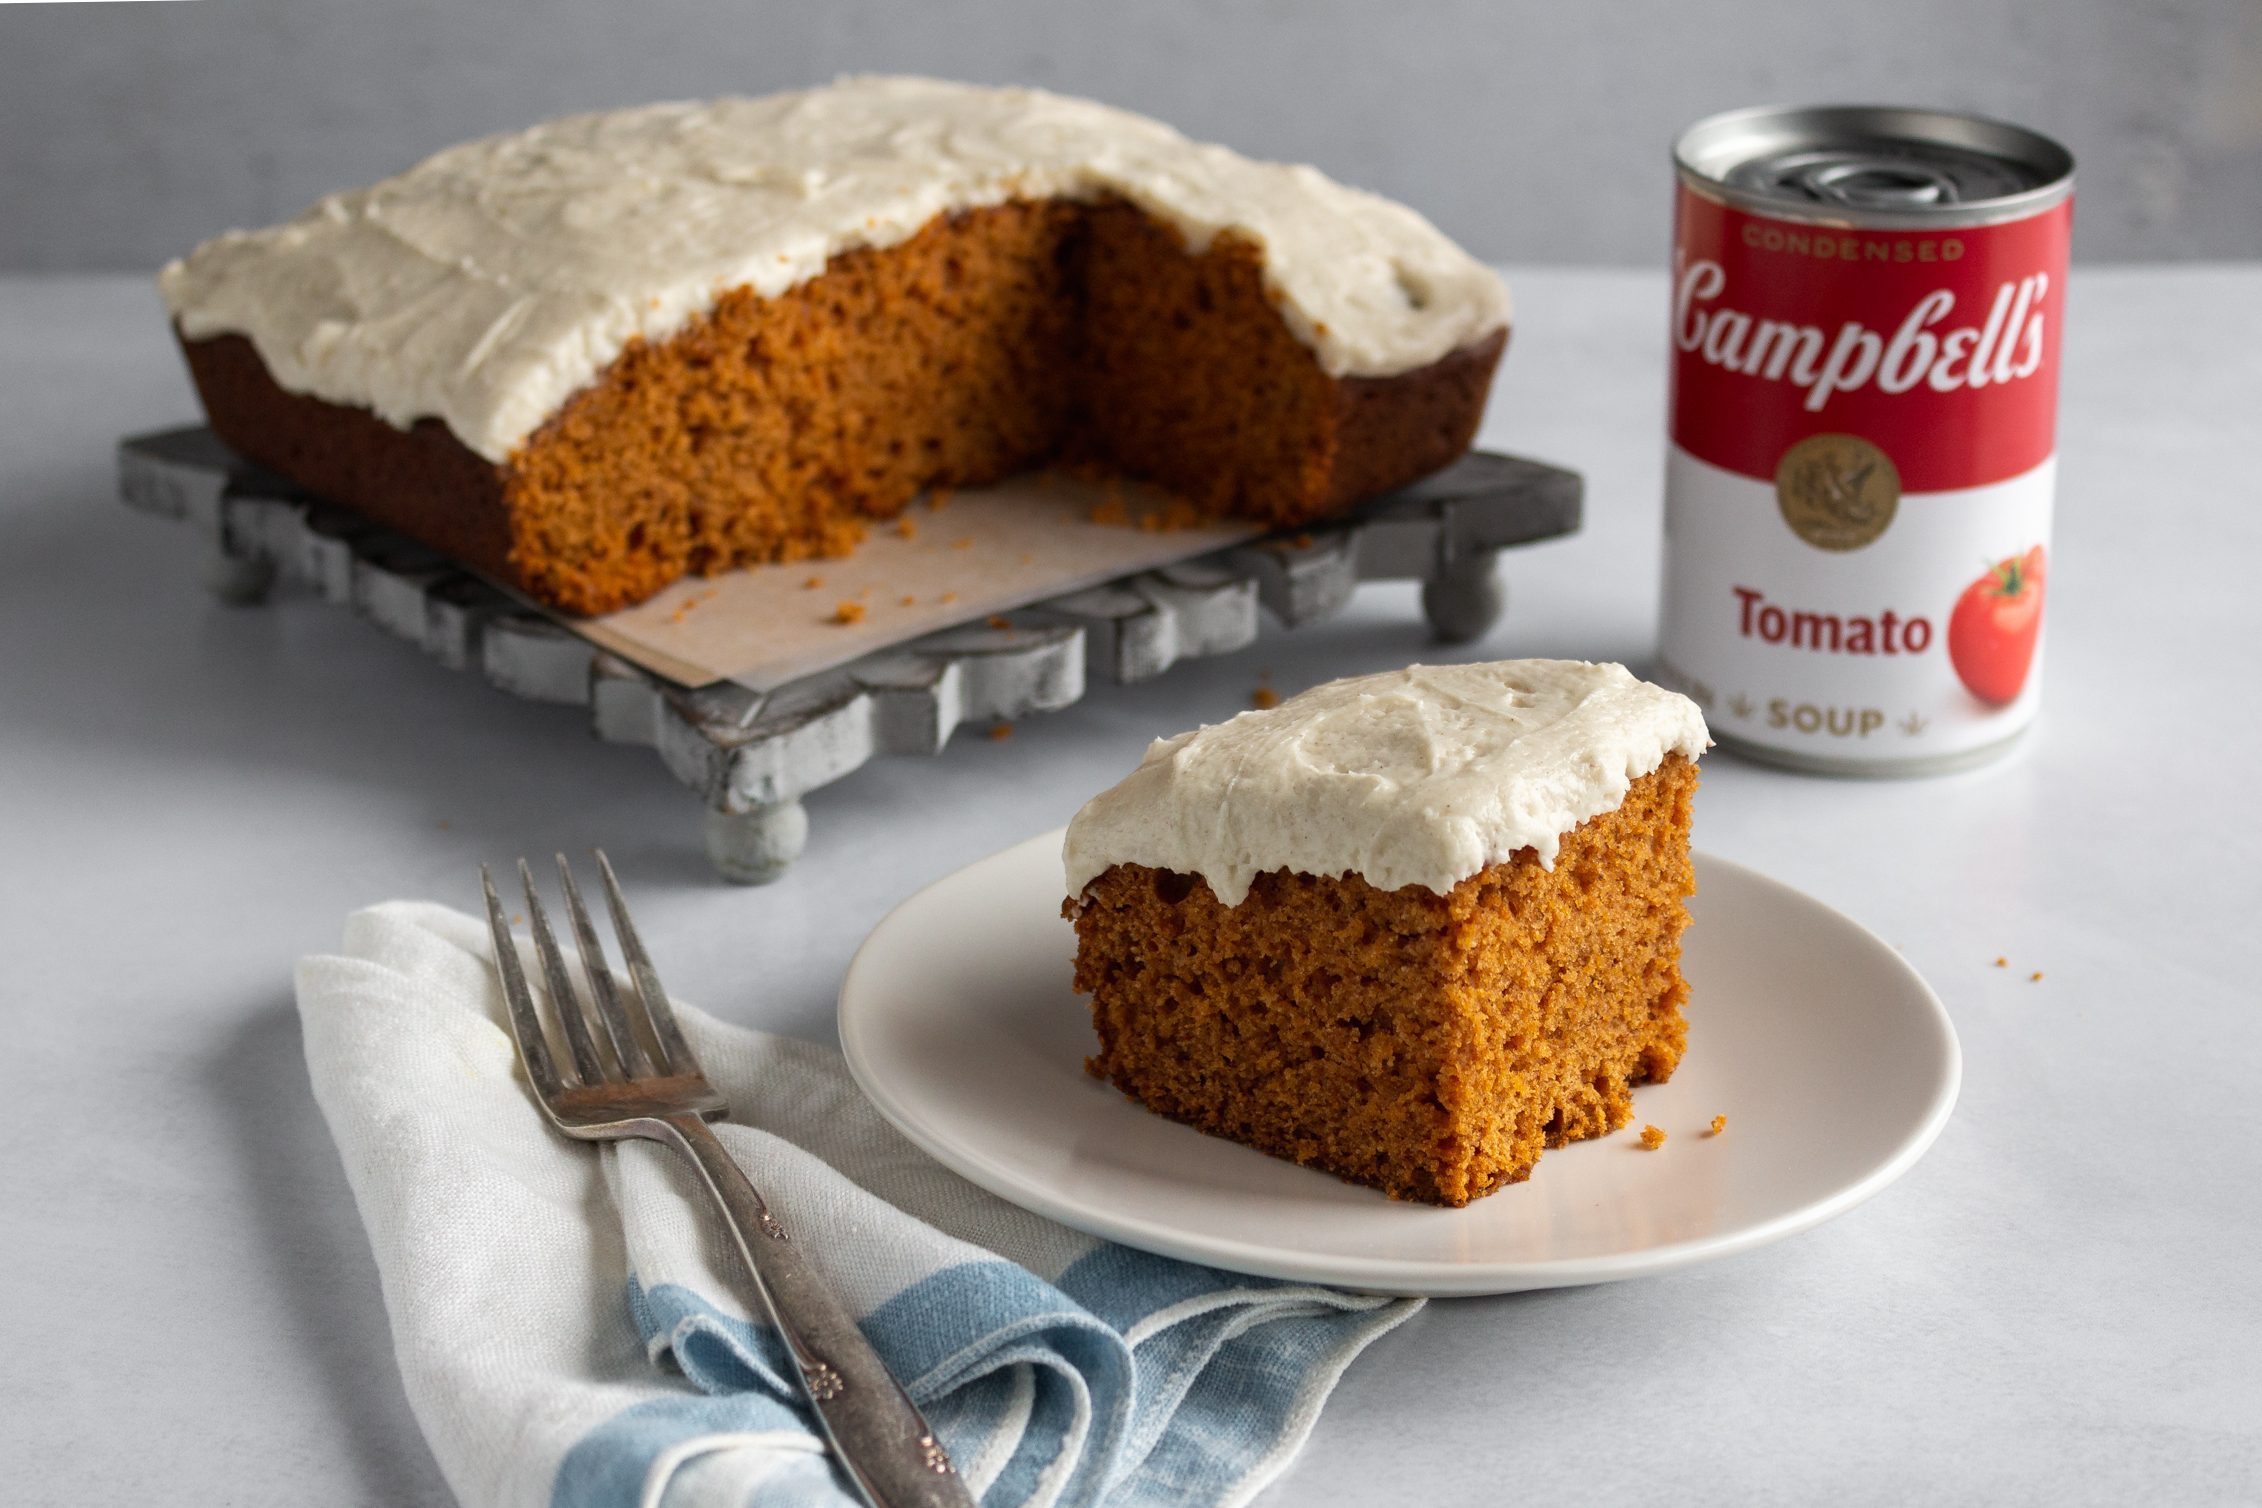 Tomato Soup Cake slice on a white place with full cake in the background next to a can of campbells tomato soup